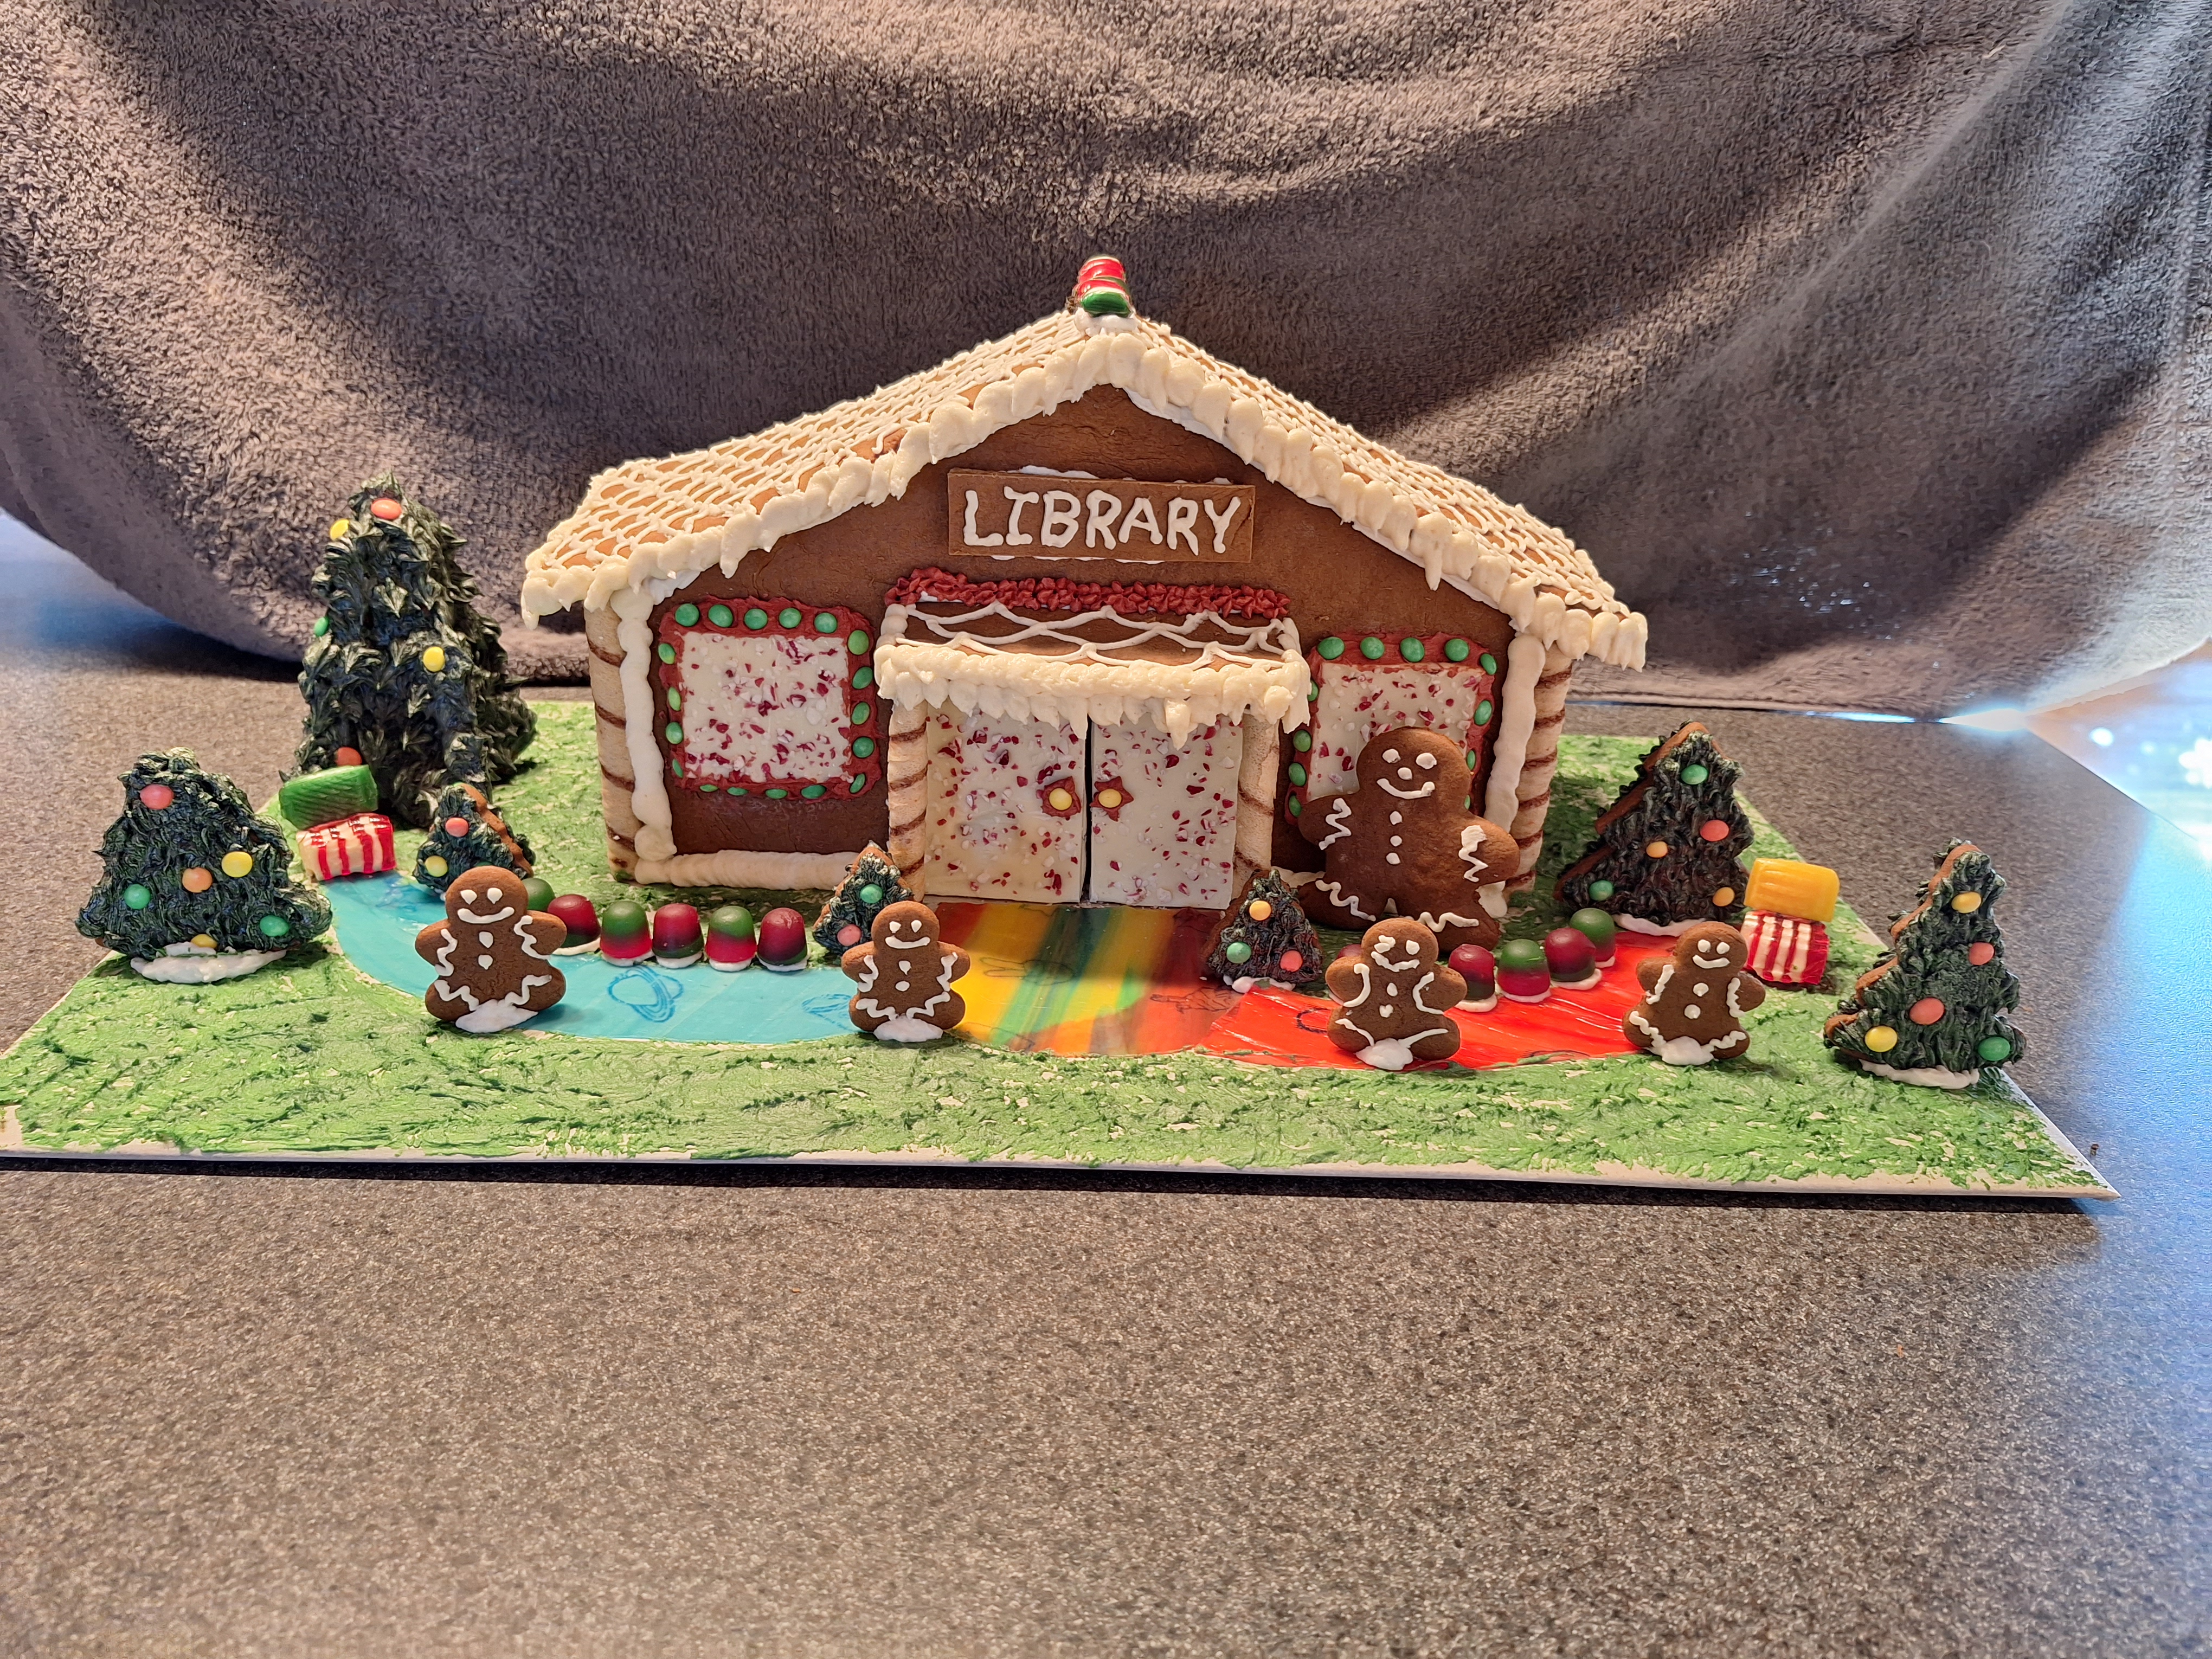 A gingerbread library has gingerbread people and trees in front.